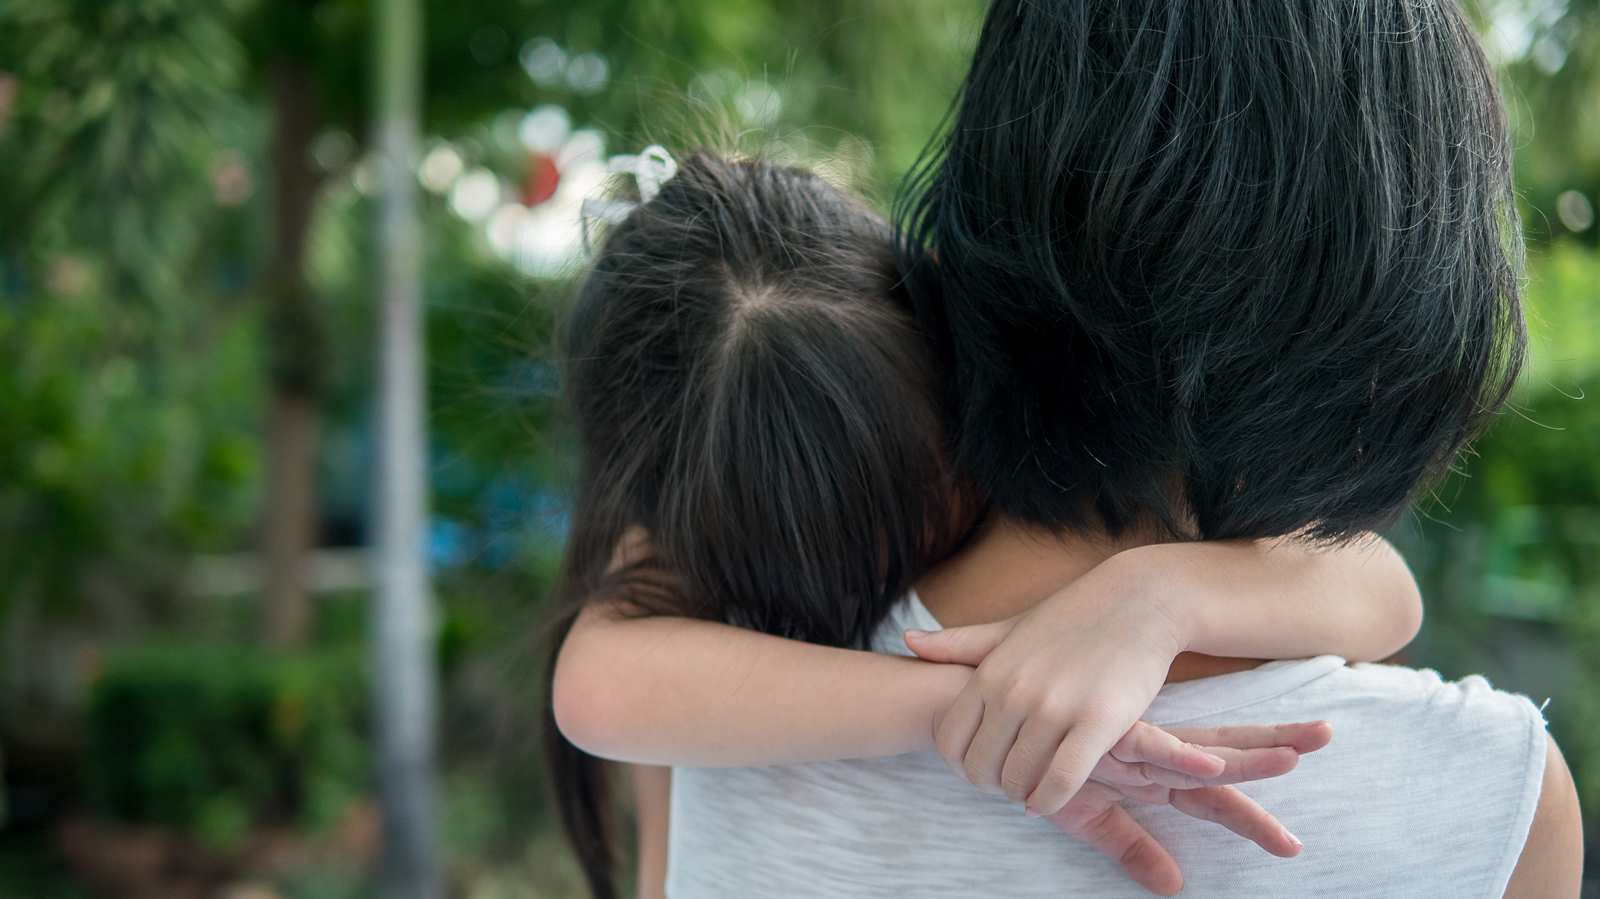 Single mothers yearn for a proper support network to help them cope with their struggles